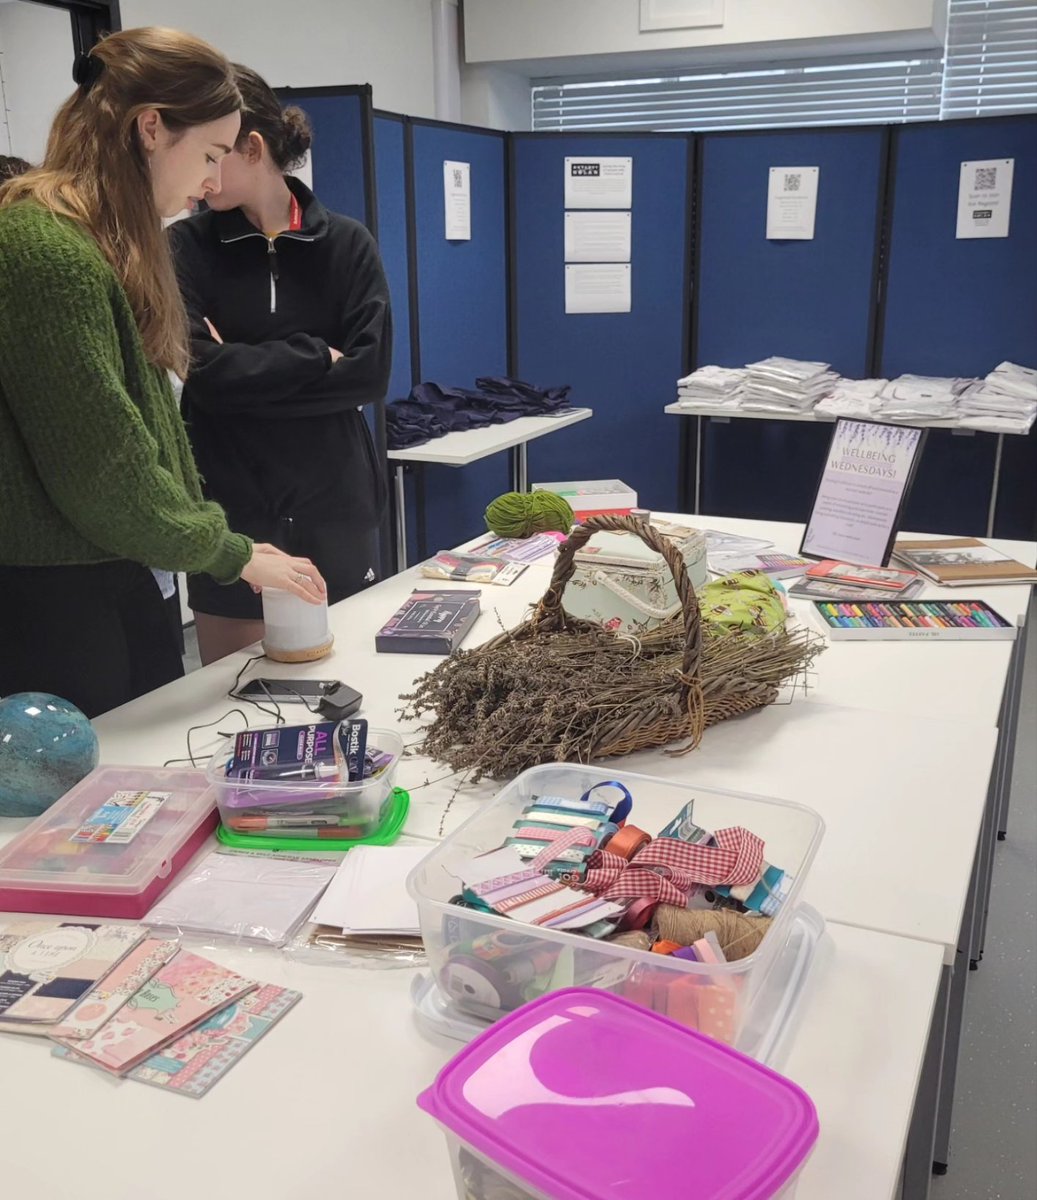 We thoroughly enjoyed our coffee and cake morning. We raised £287 for @anthonynolancharity our @uofl_schoolofhealthcare charity of the year. Wellbeing Wednesday joined us to crochet, make lavender bags and enjoy some massage and art therapy! Looking forward to the next time ❤️